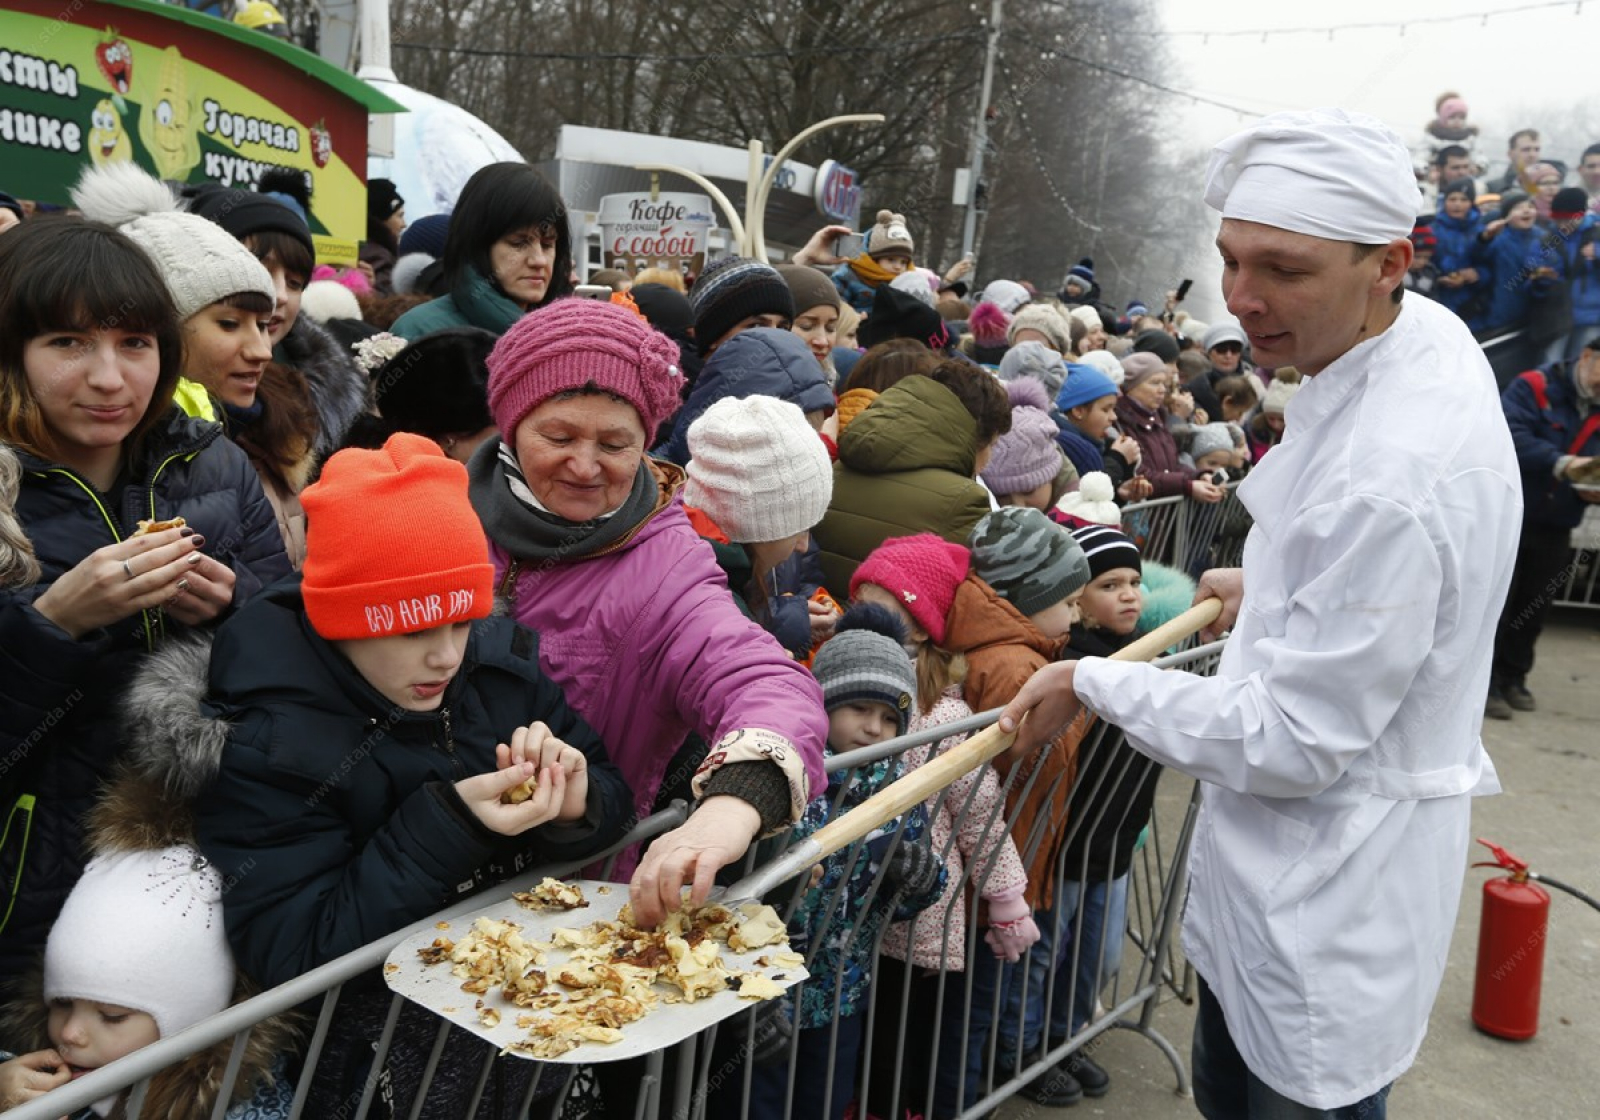 Pancakes served on showels to the crowd during some fucked up russian celebration years ago